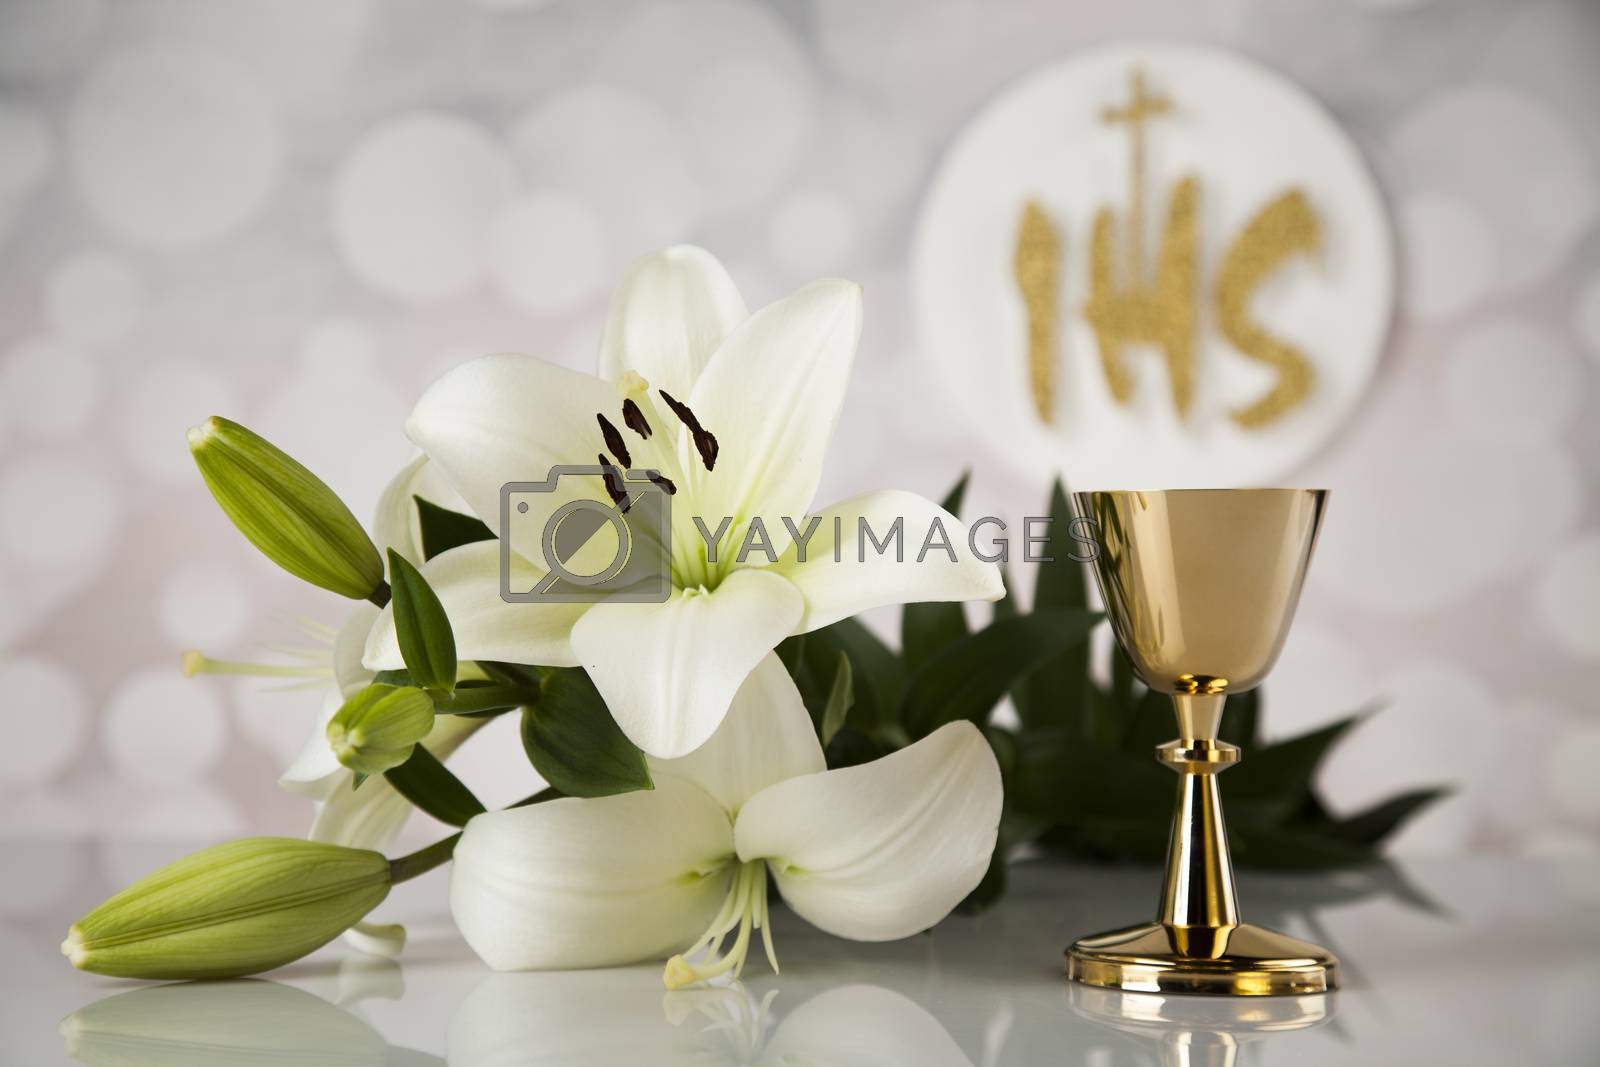 Royalty free image of Symbol christianity religion a golden chalice with grapes and br by JanPietruszka